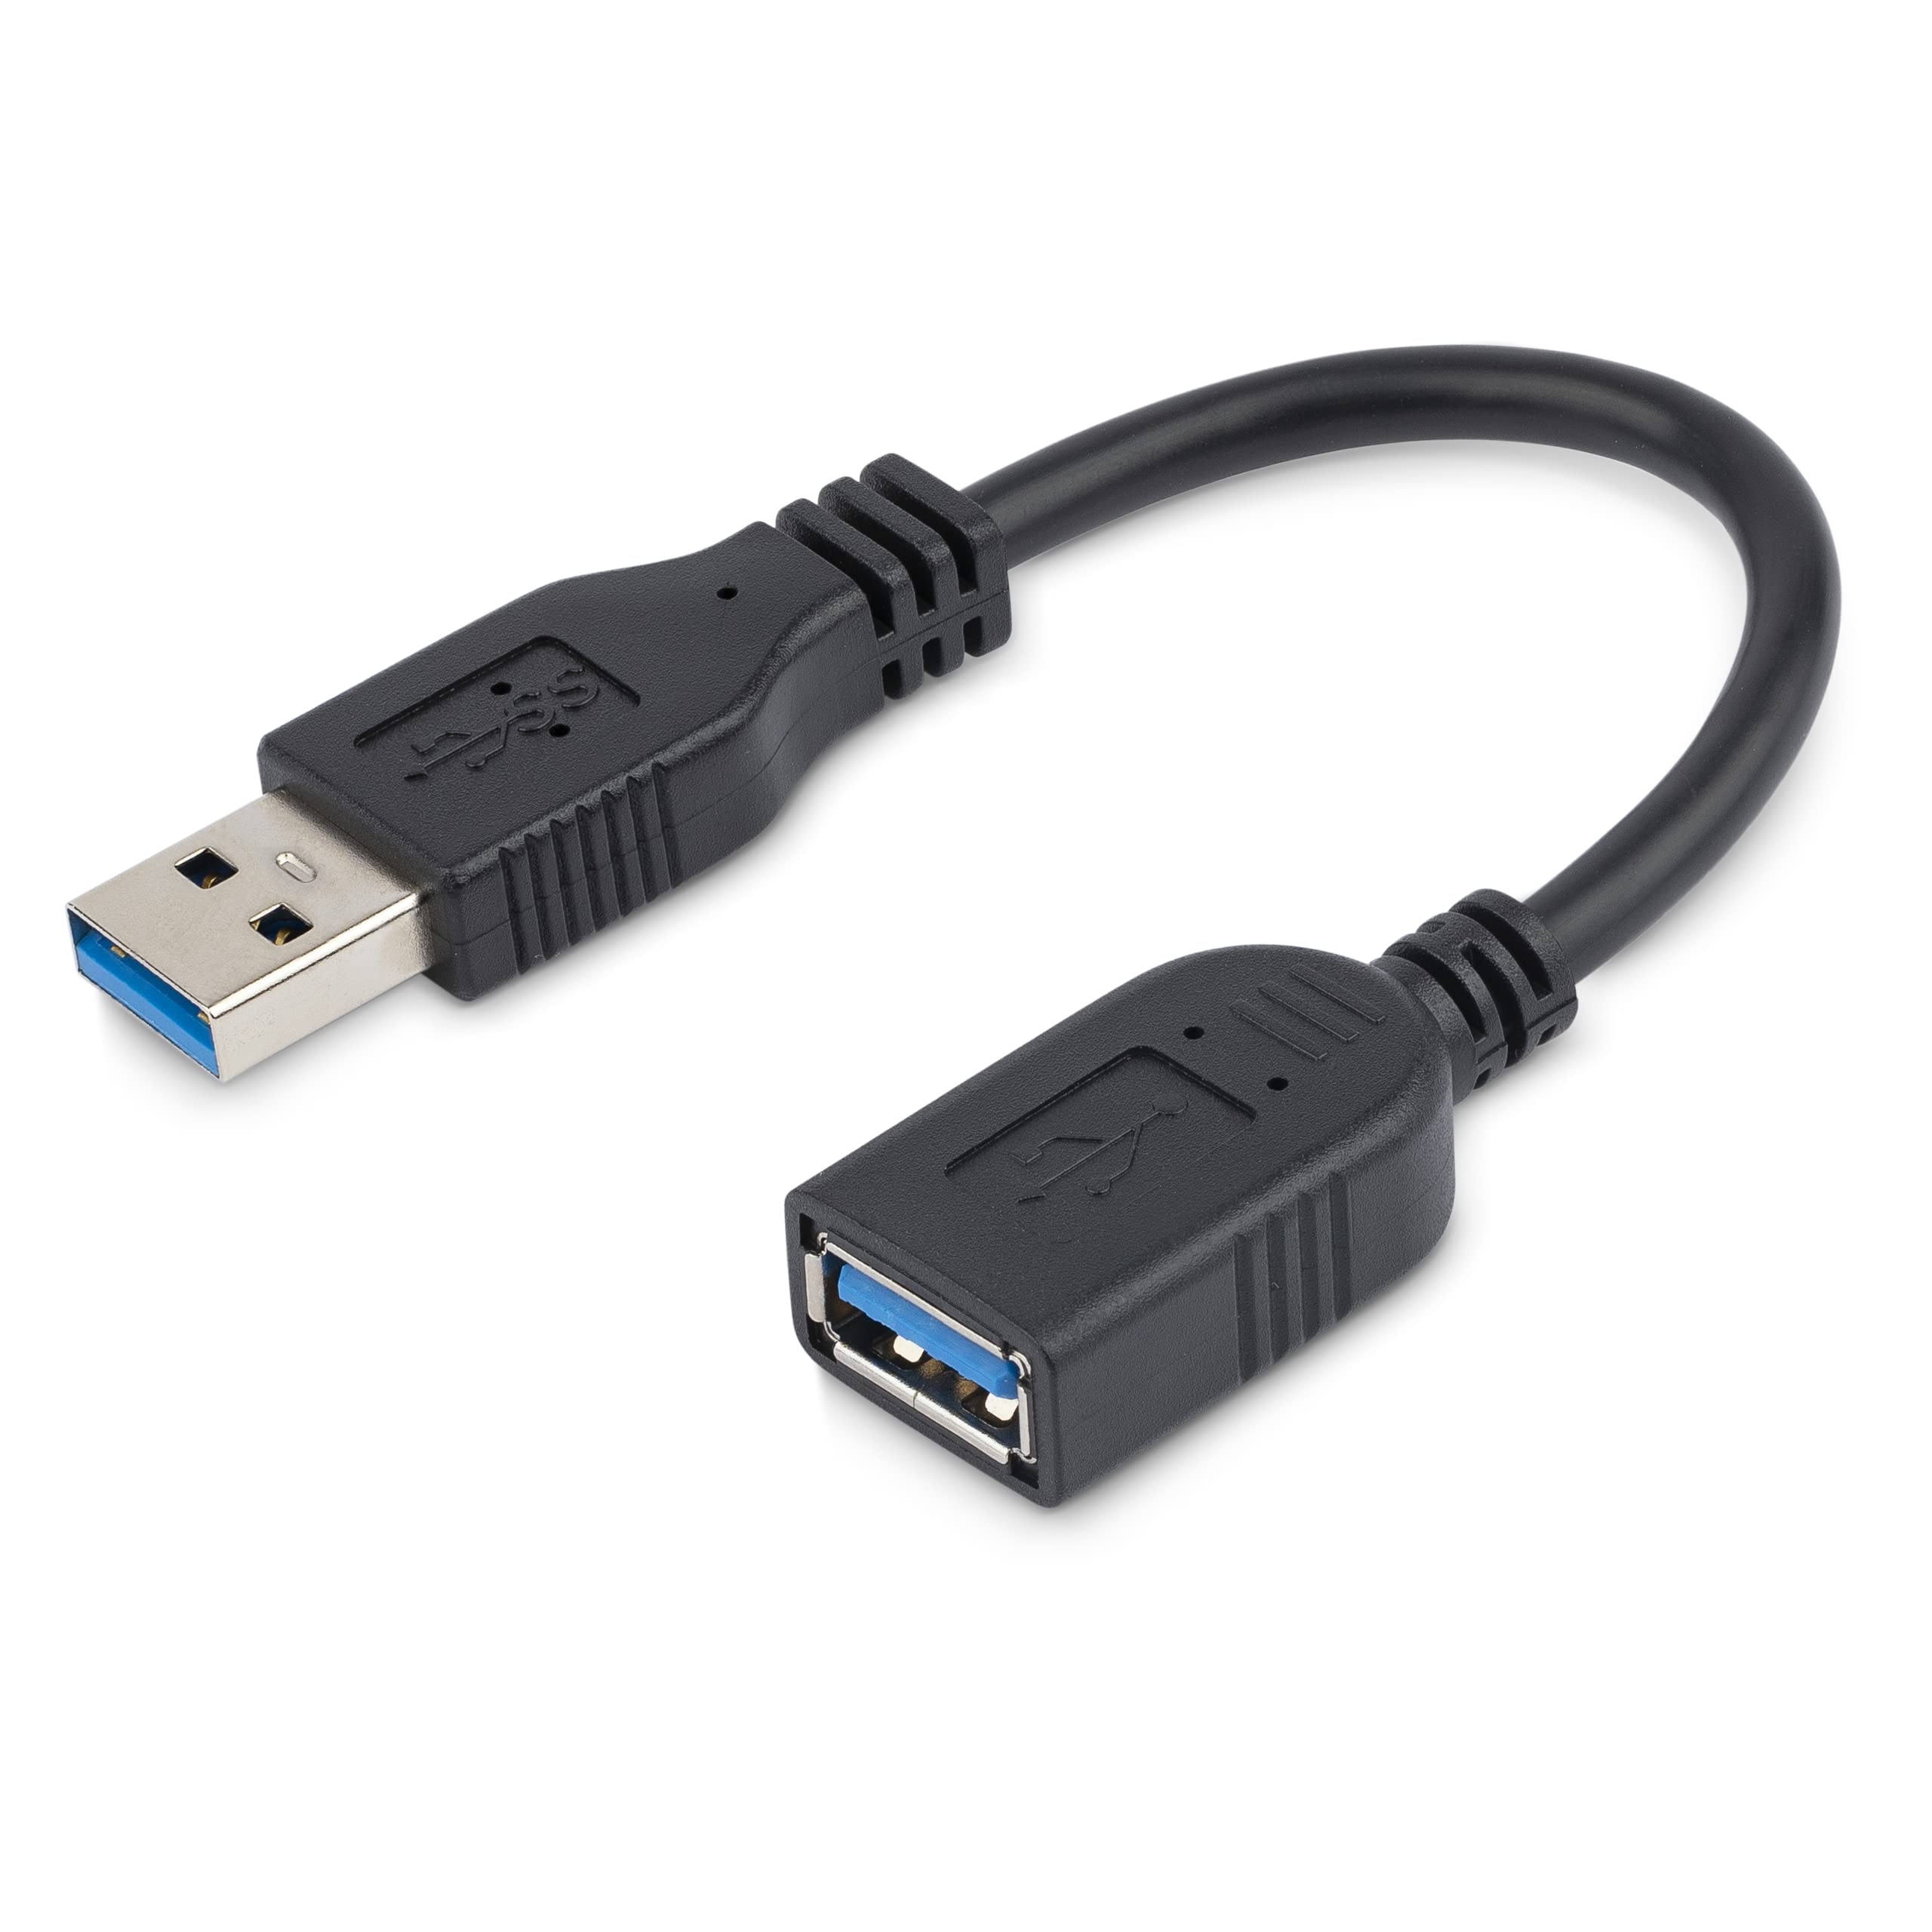 USB cable and port